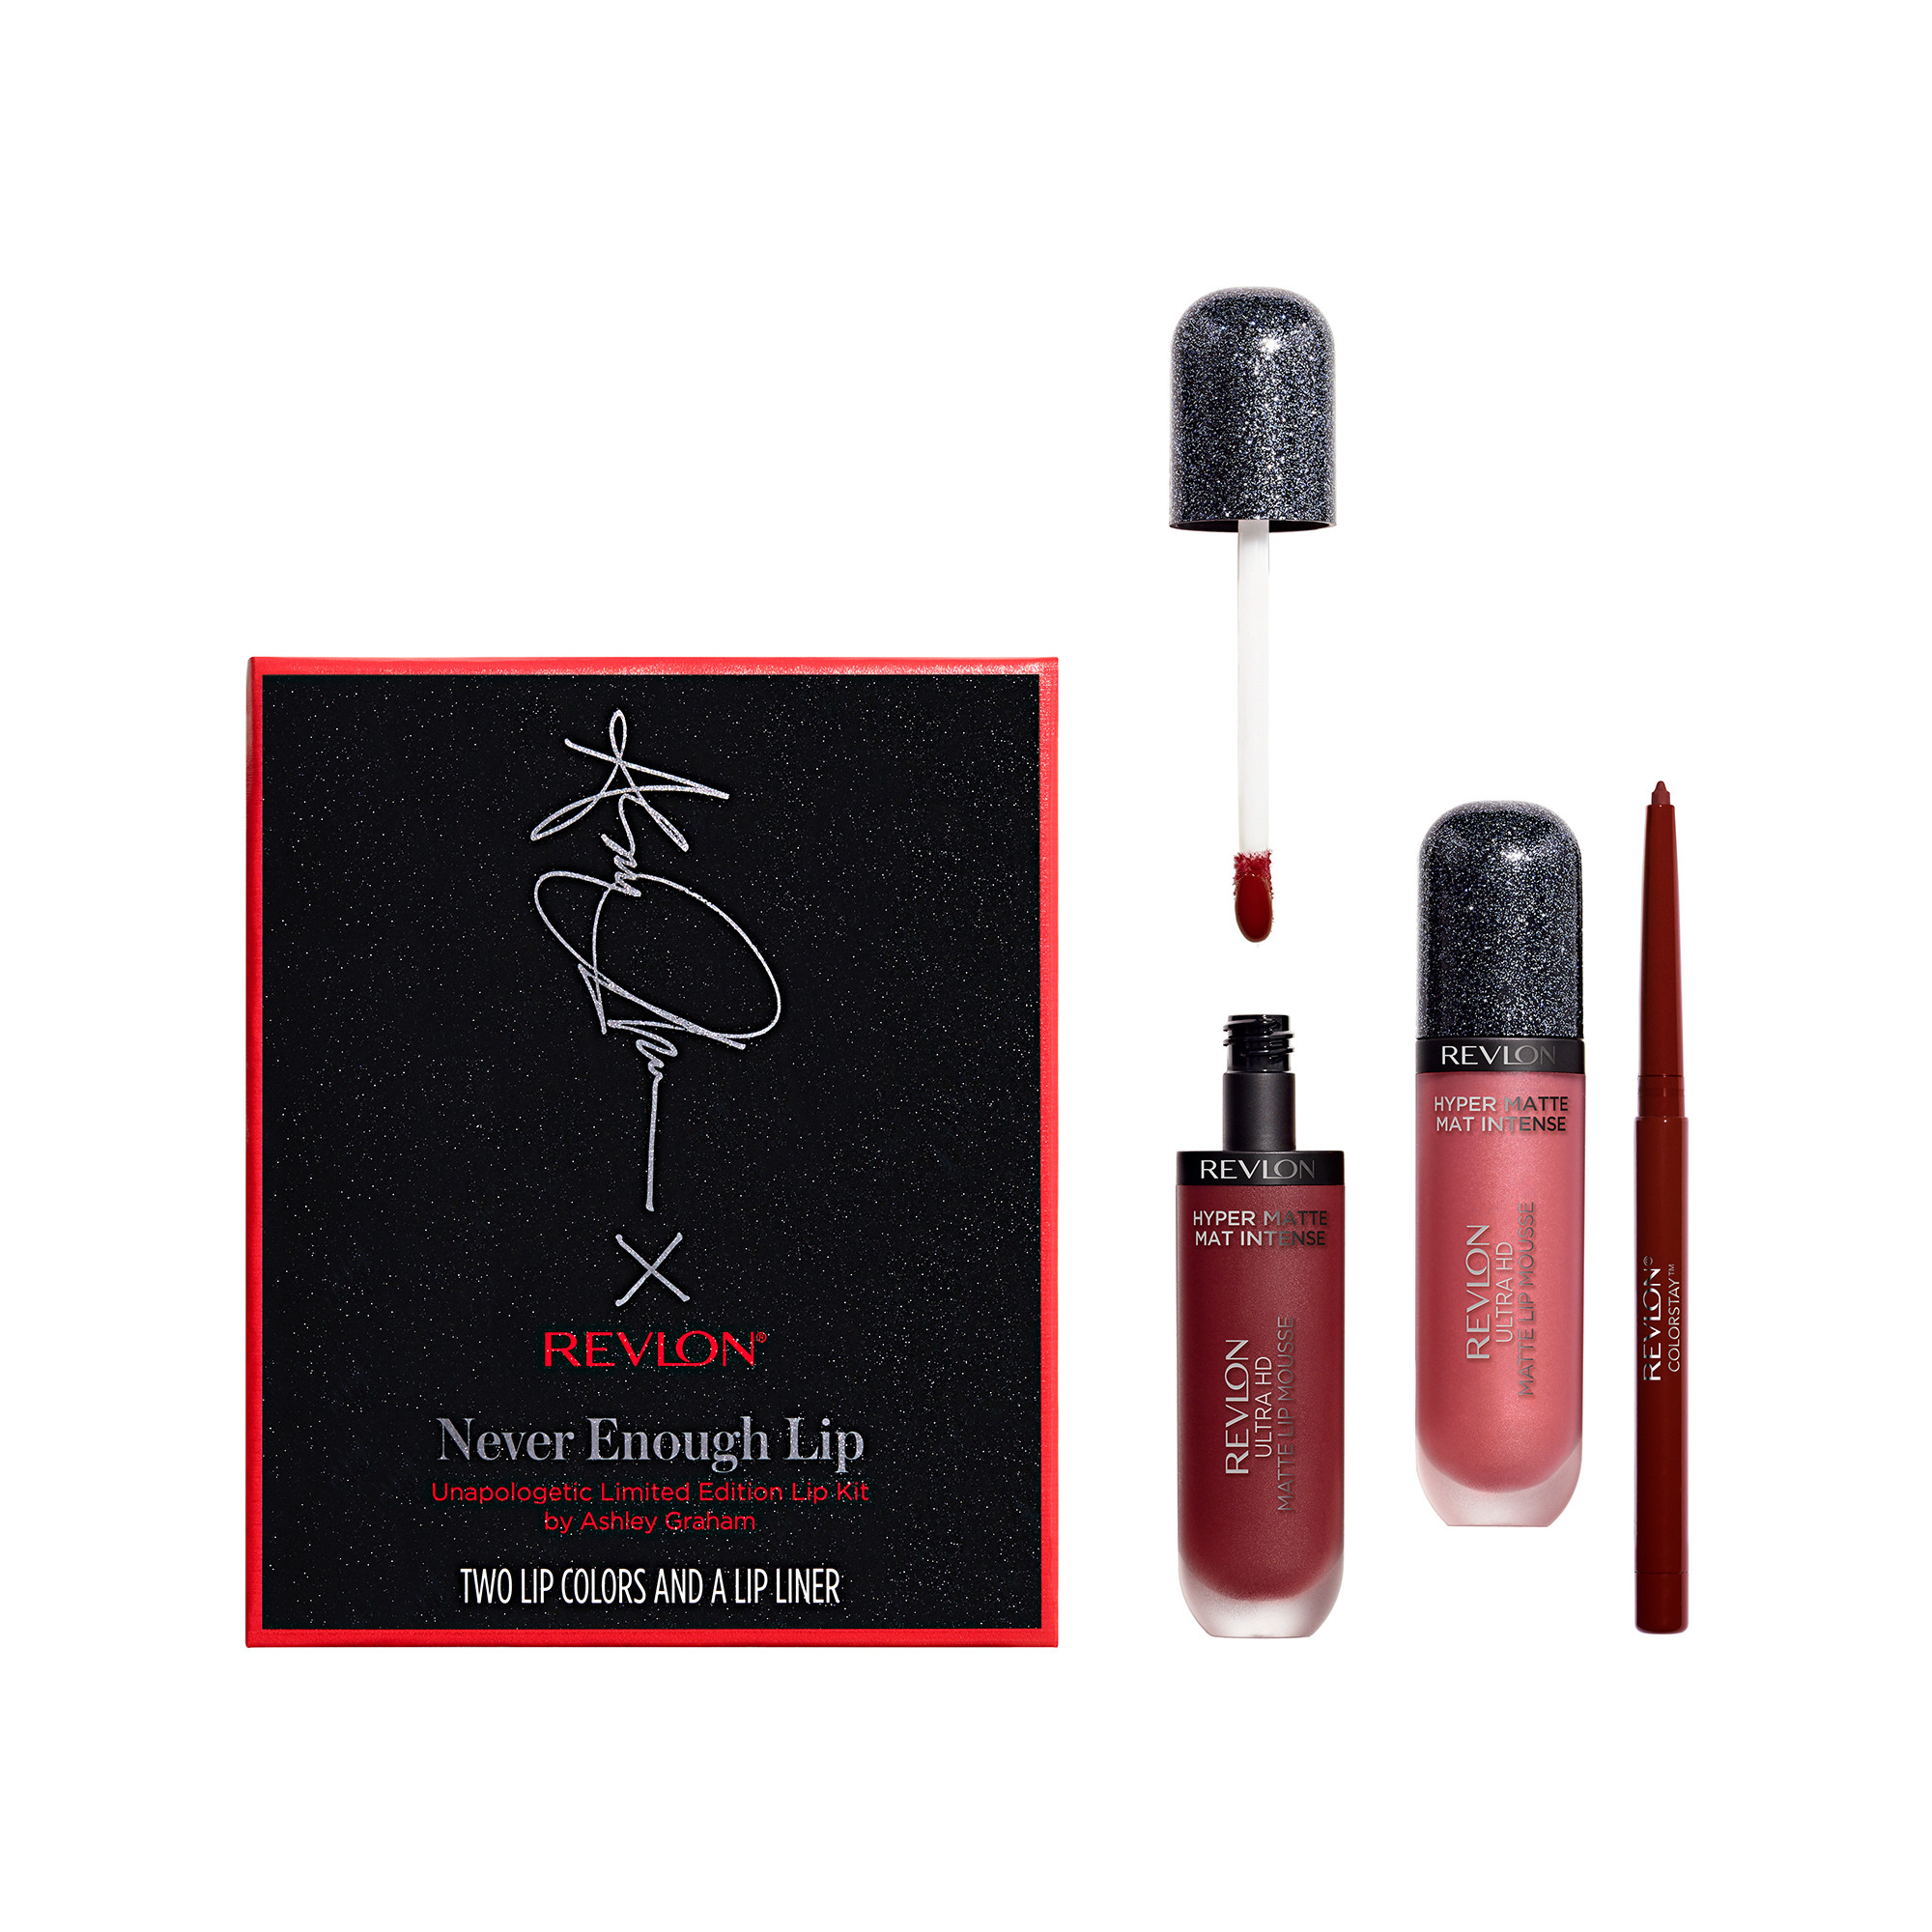 Revlon Never Enough Lip, Unapologetic Limited Edition Lip Kit By Ashley Graham, 3 Piece Kit - image 1 of 4